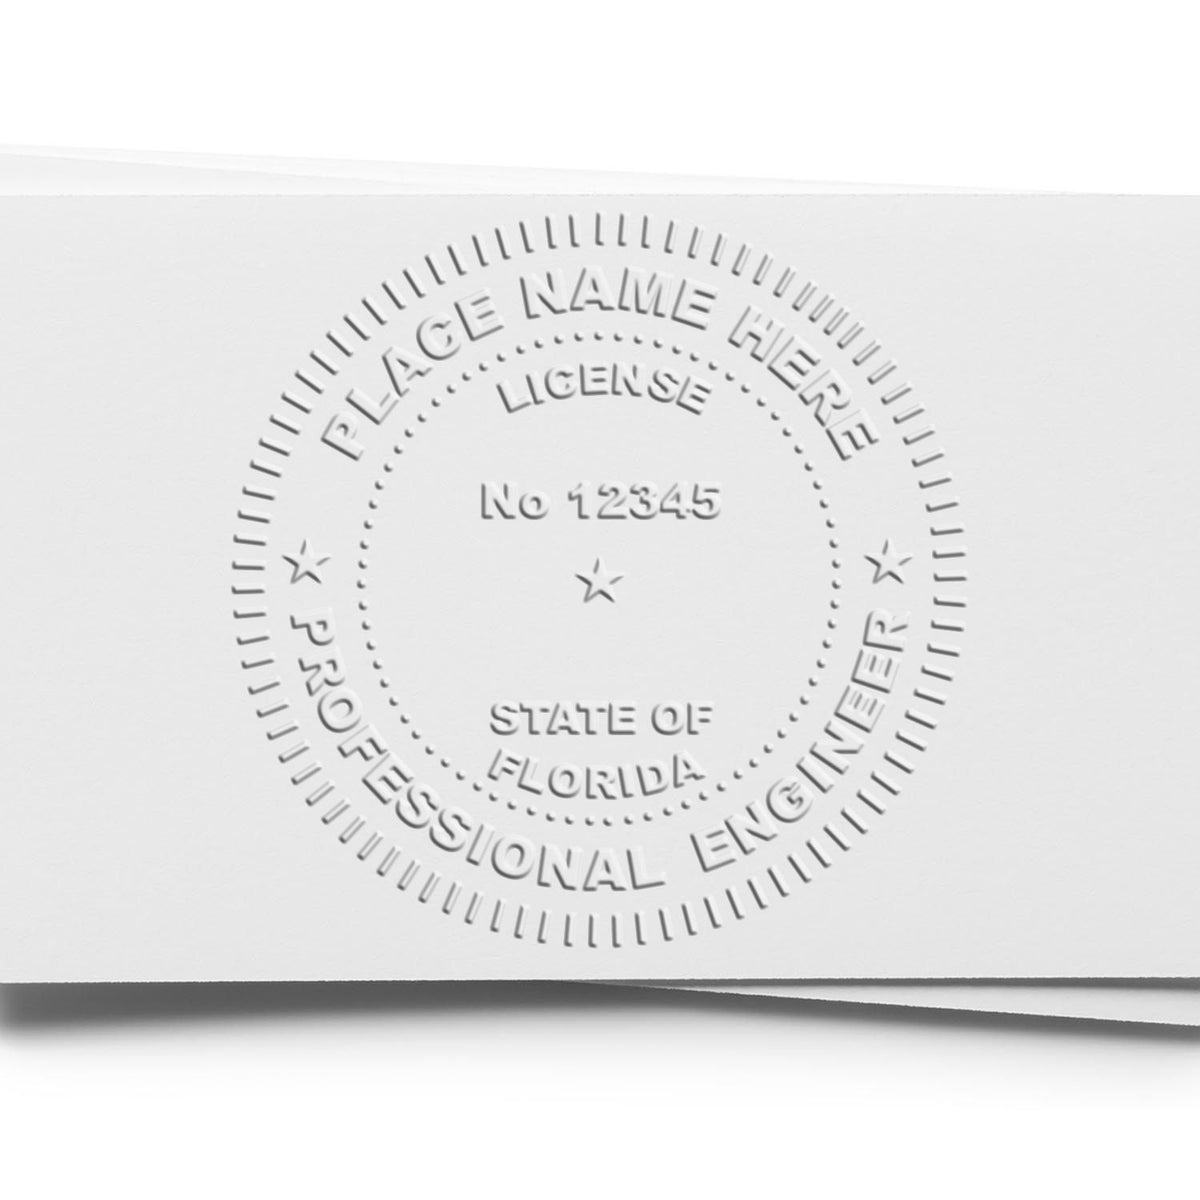 The Gift Florida Engineer Seal stamp impression comes to life with a crisp, detailed image stamped on paper - showcasing true professional quality.